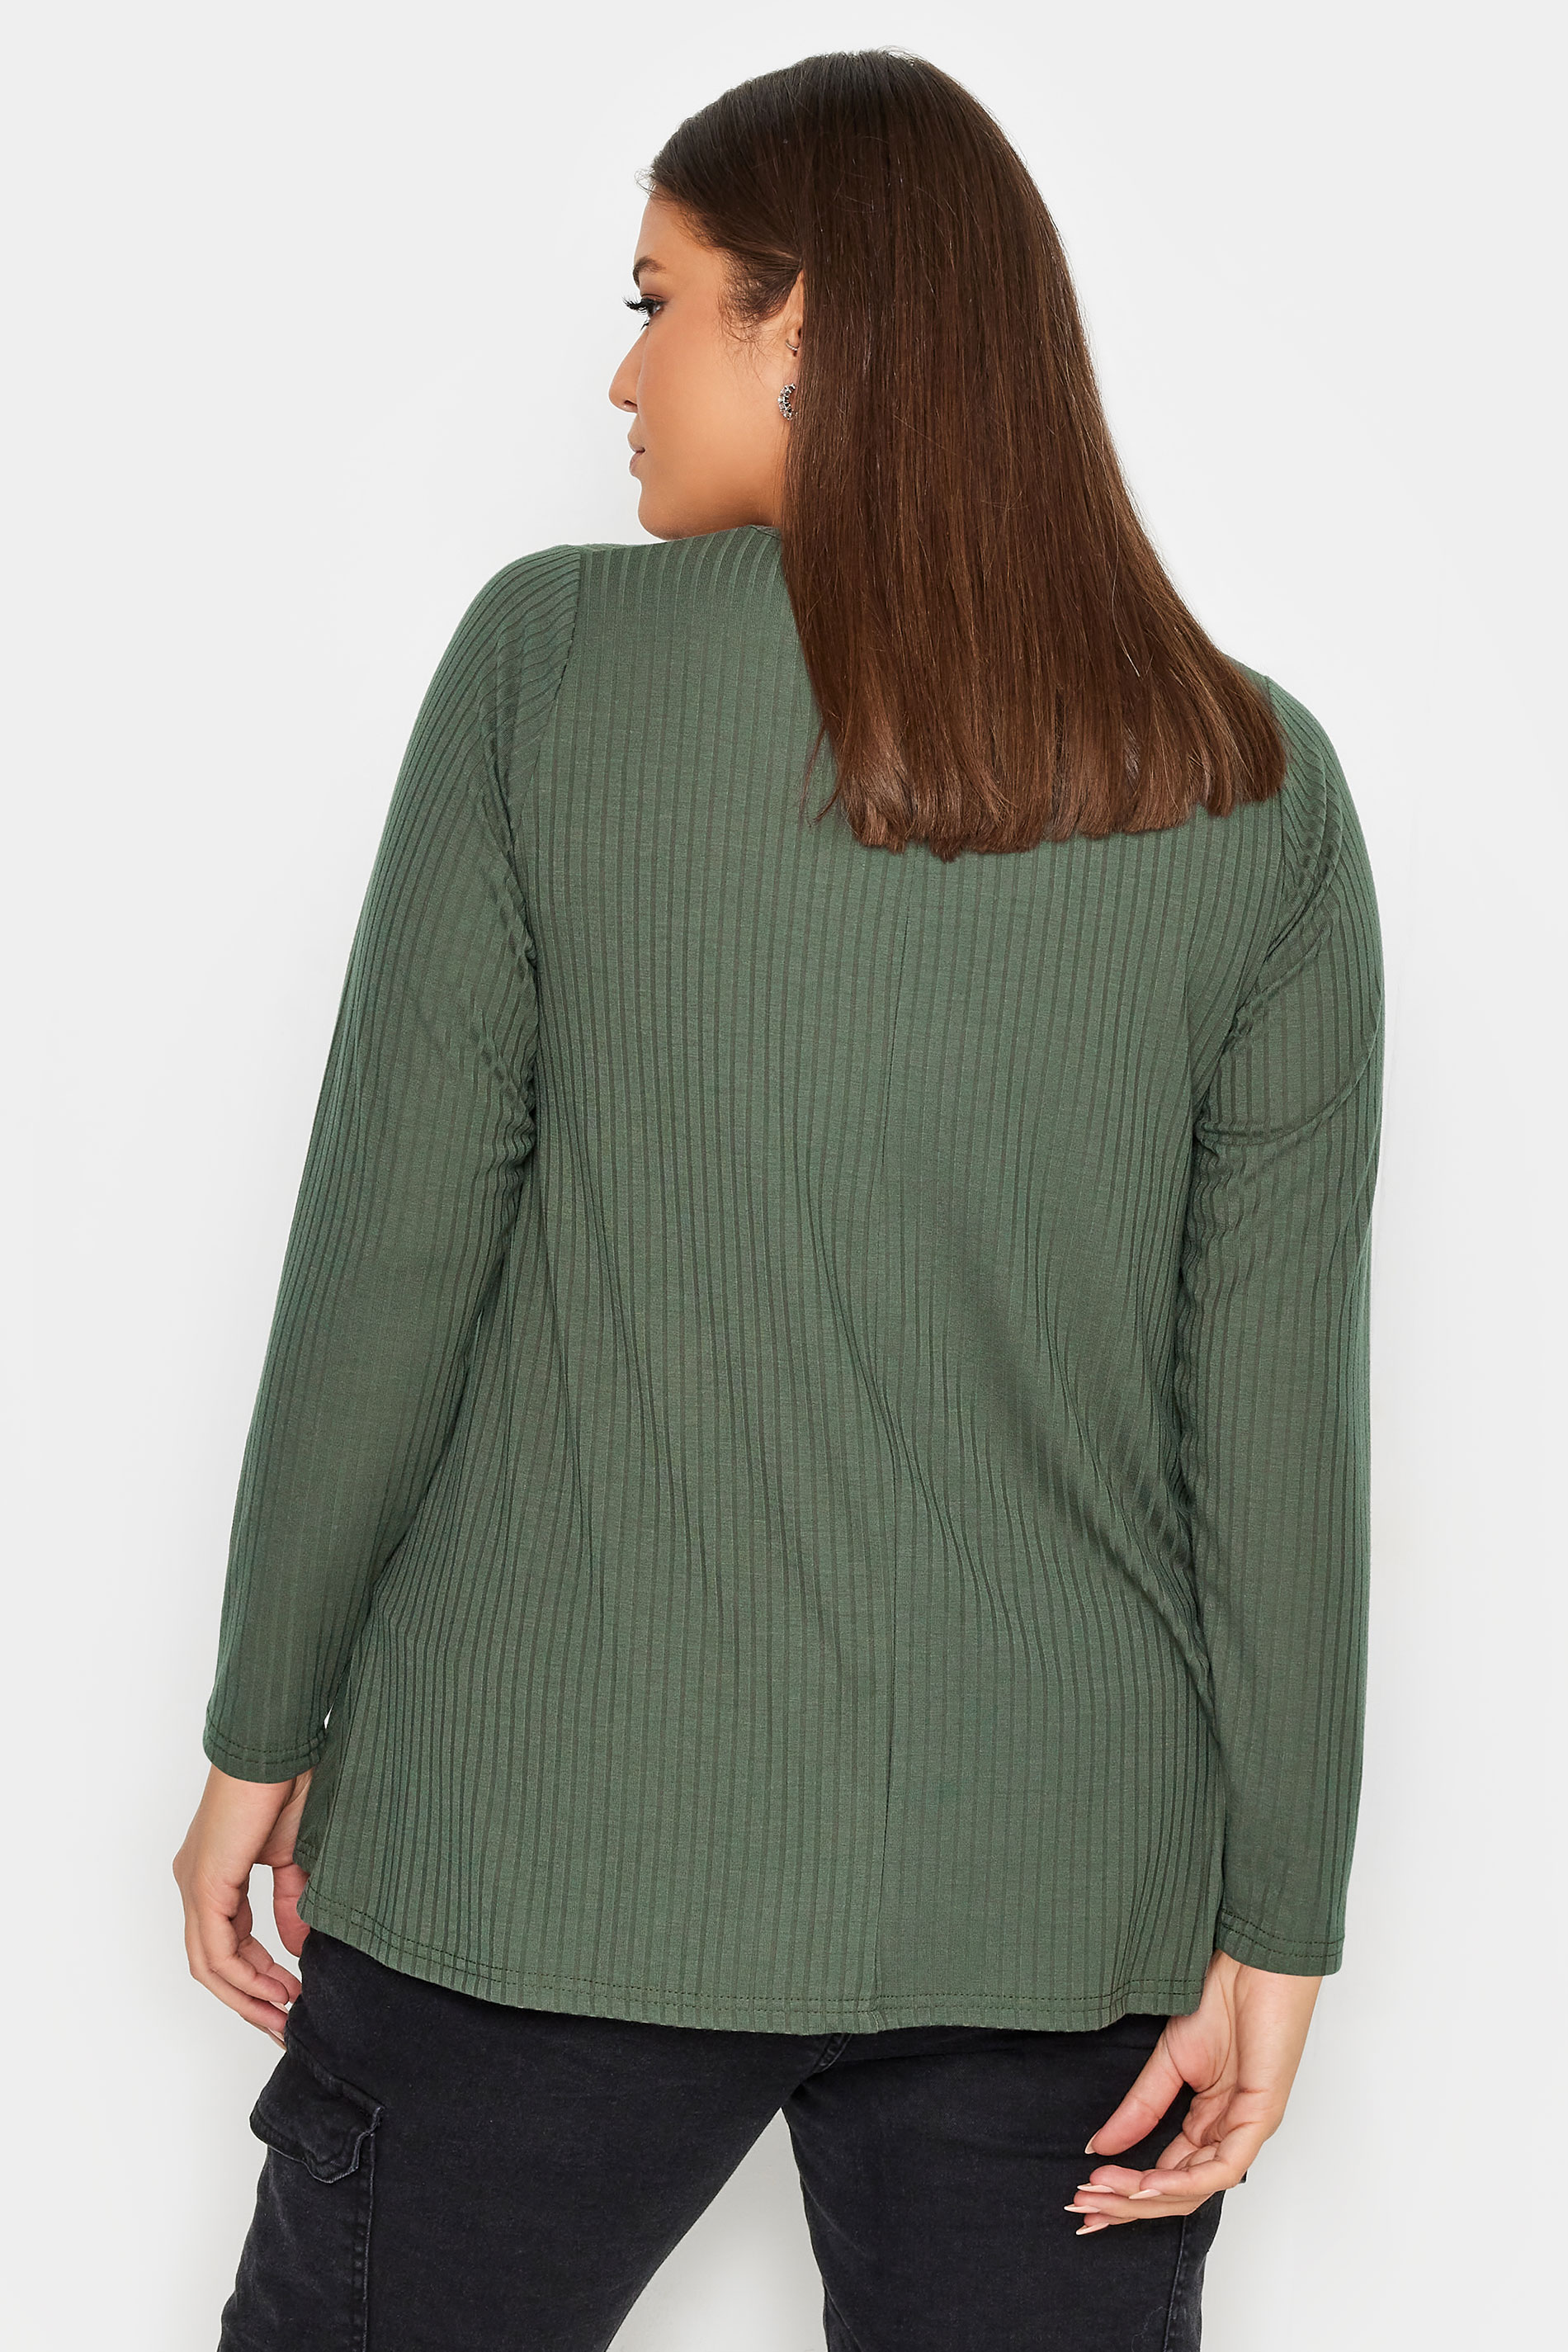 LIMITED COLLECTION Plus Size Khaki Green Ribbed Button Front Top | Yours Clothing 2